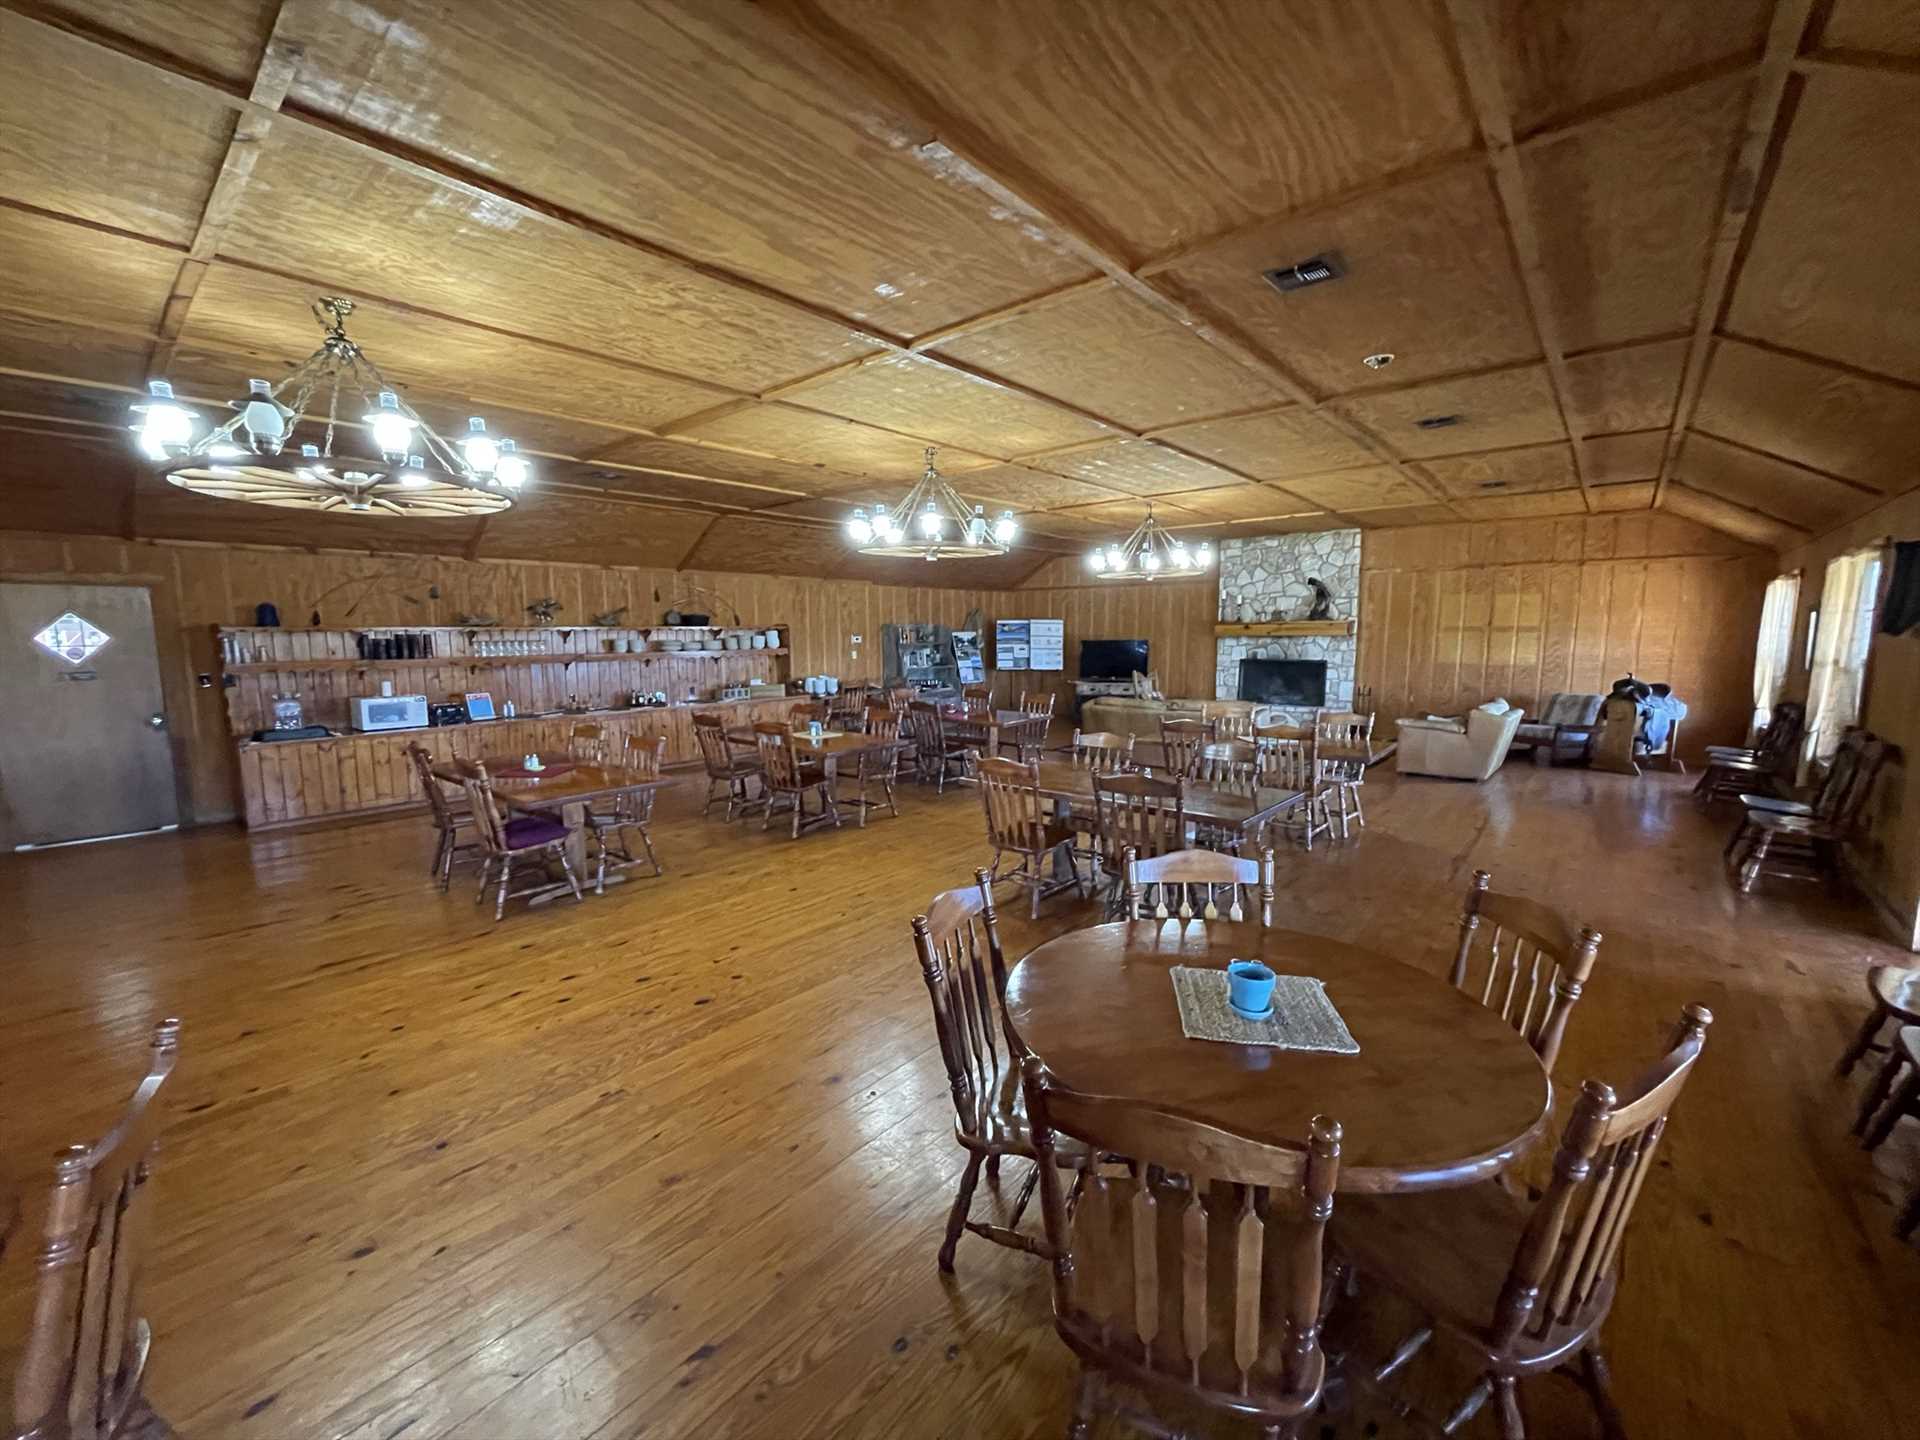                                                 The gigantic dining hall at the Lodge is not only a great place to visit with others, but it's also where you'll enjoy a complimentary country-fresh breakfast every morning!